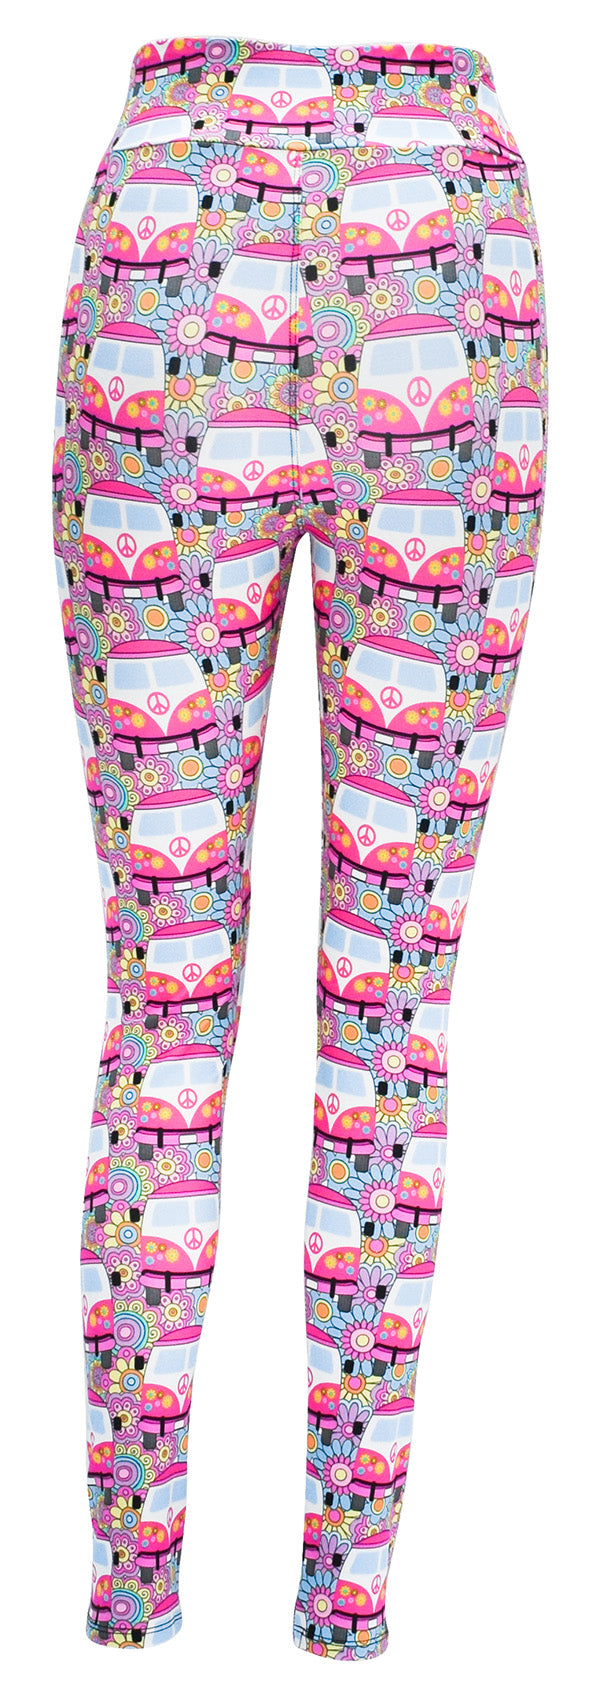 Carry On Camping-Adult Leggings